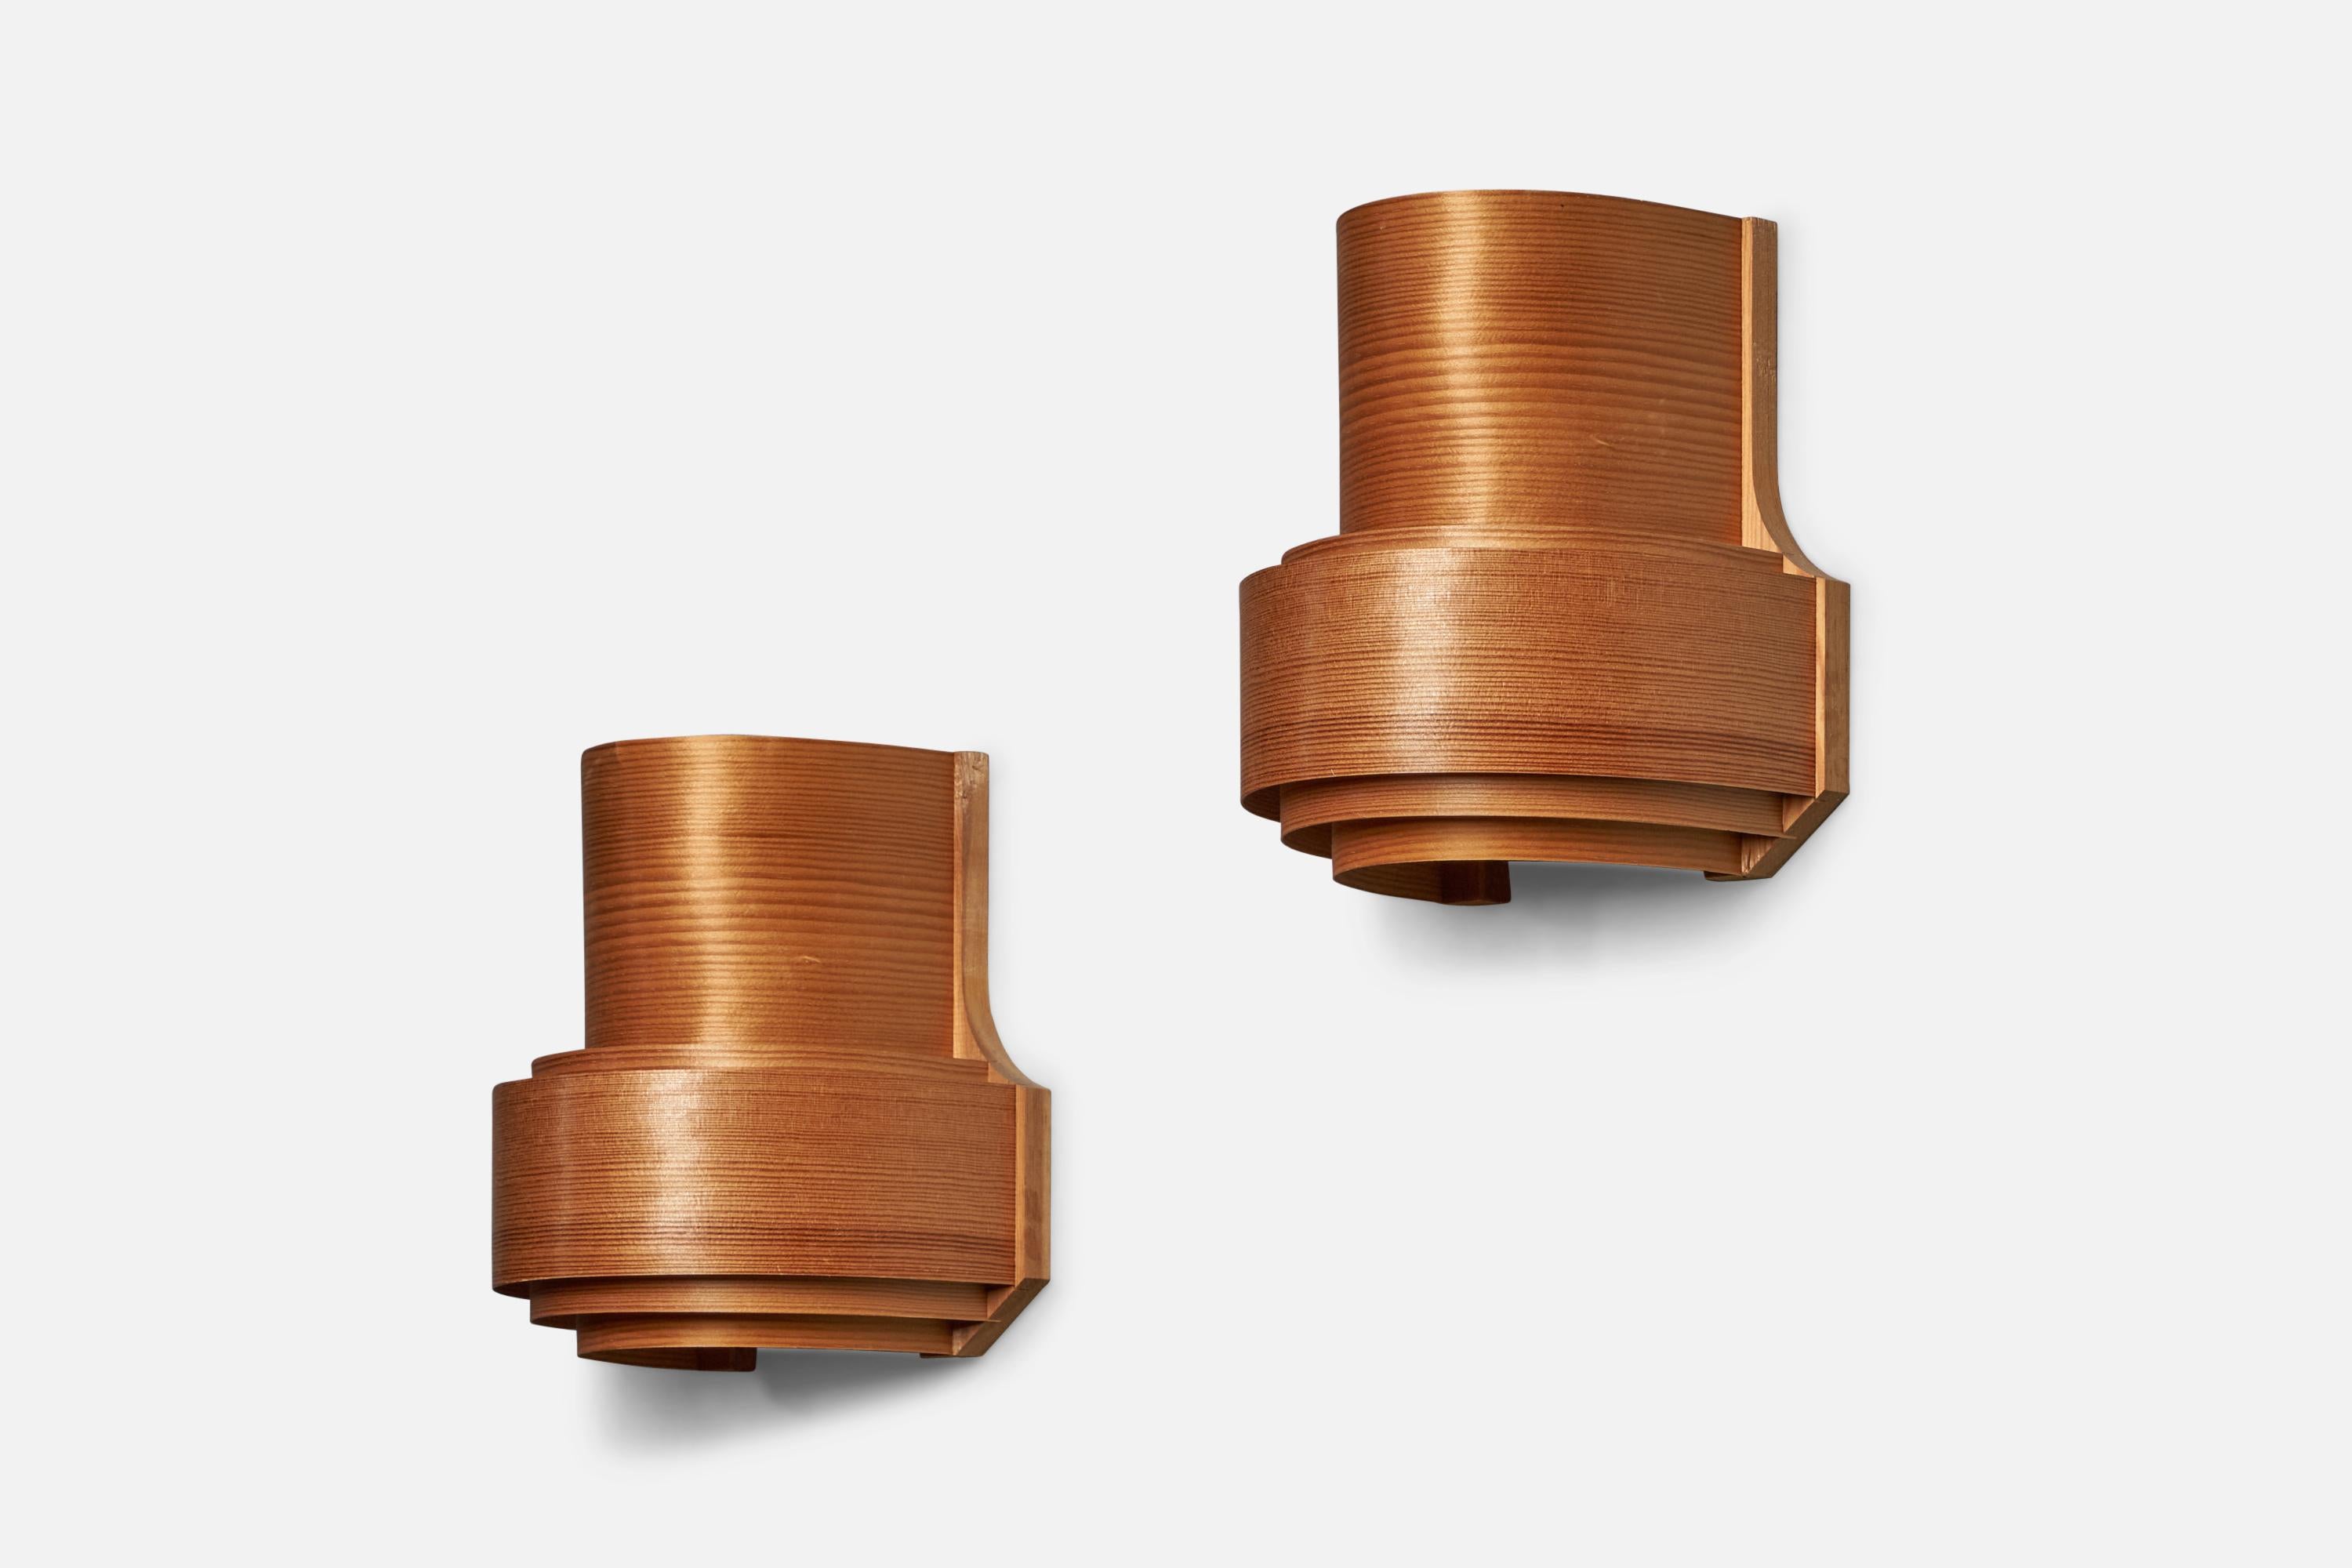 A pair of pine and moulded pine veneer wall lights designed and produced in Denmark, 1970s.

Overall Dimensions (inches): 9” H x 8.5” W x 6.5” D
Bulb Specifications: E-26 Bulb
Number of Sockets: 1
Minor breaks to veneer